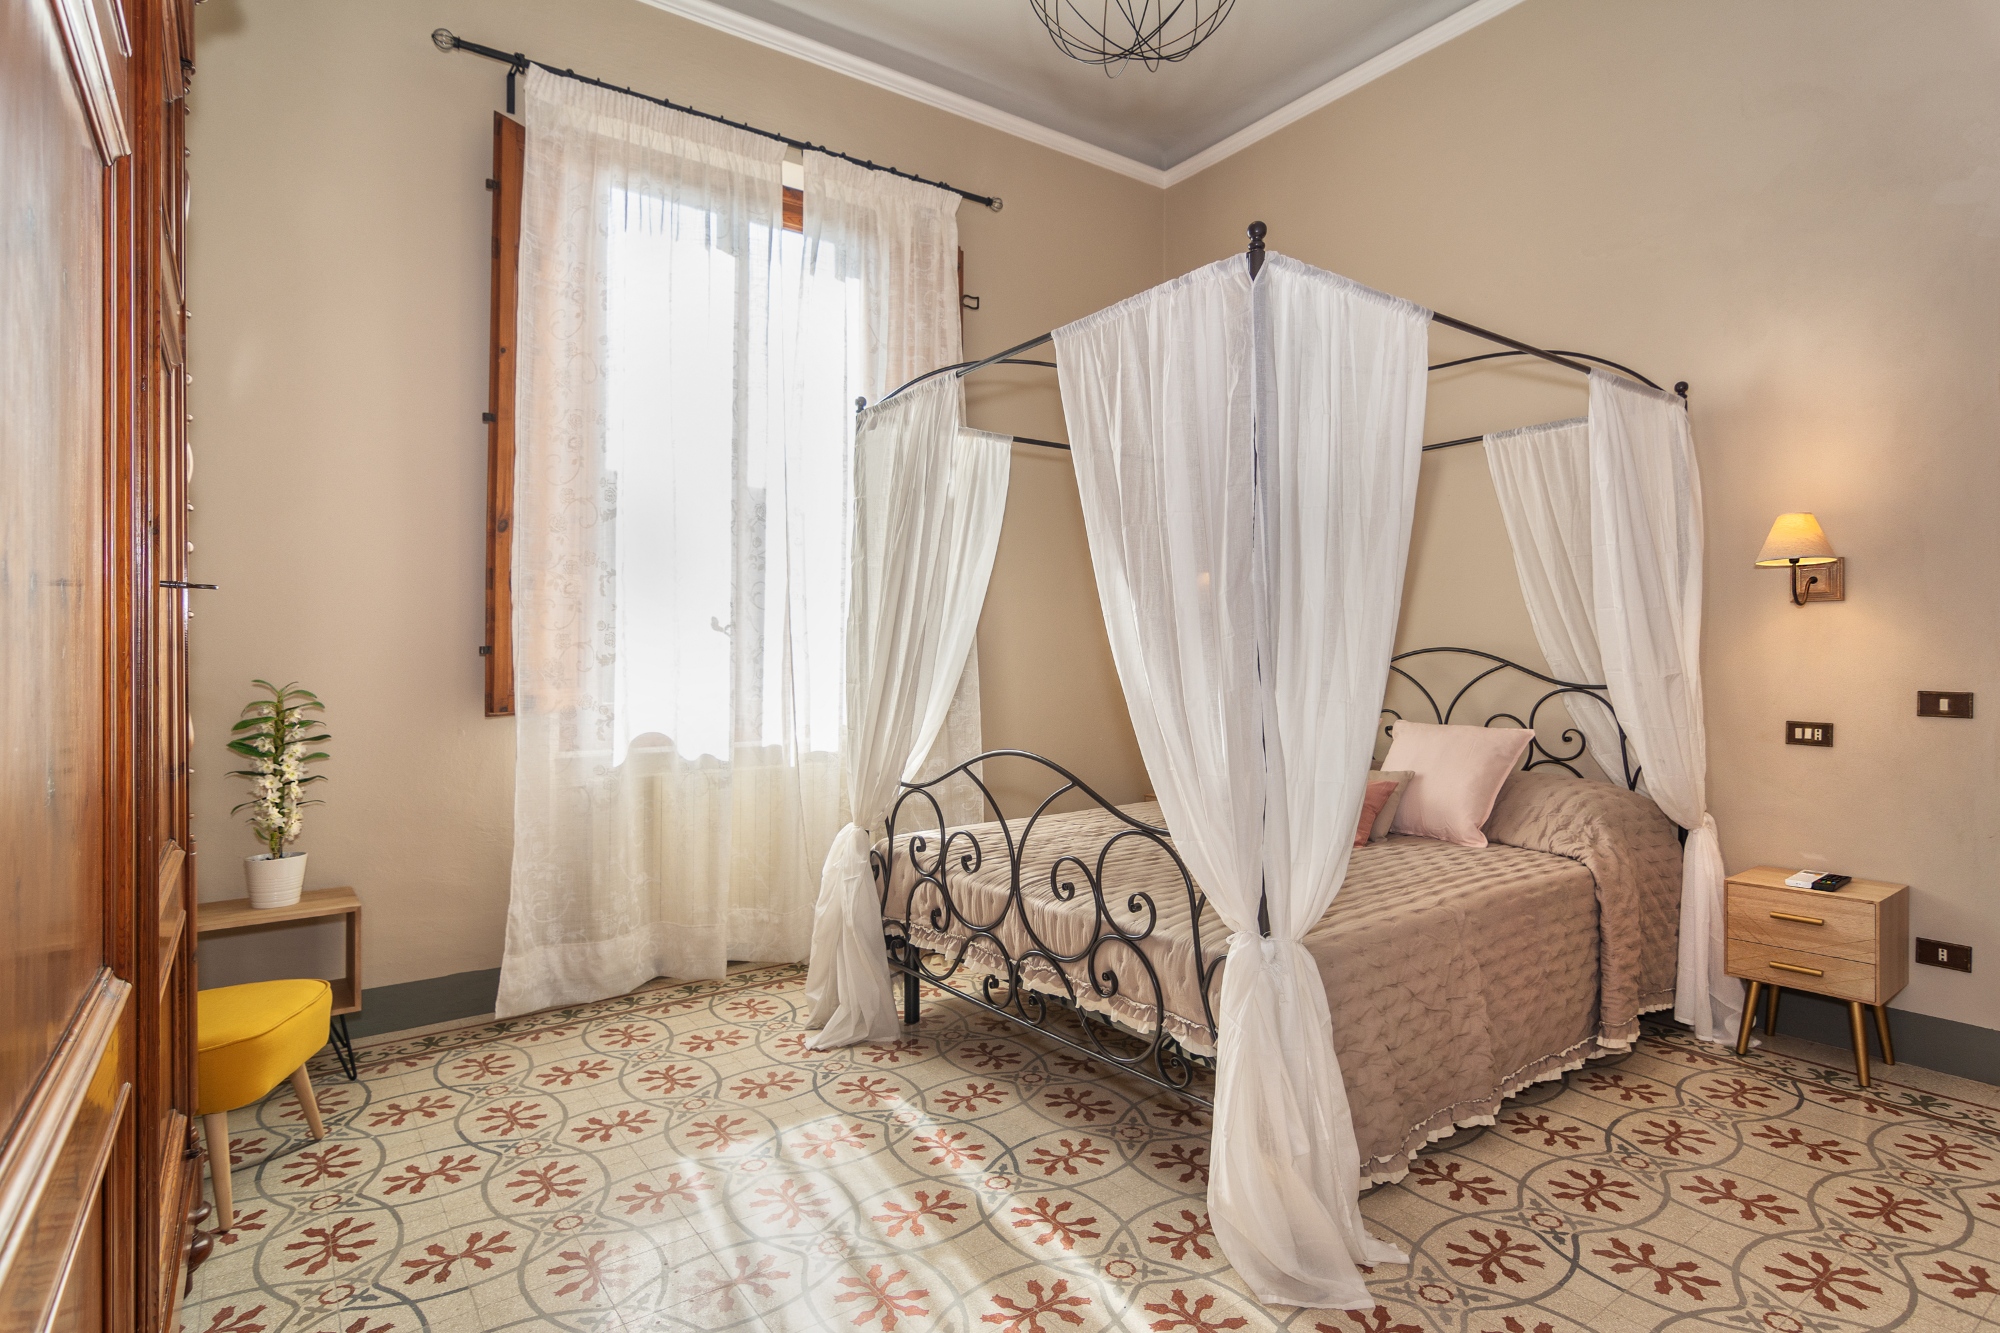 Deal for a romantic weekend in Lucca in a suite to spend romantic moments